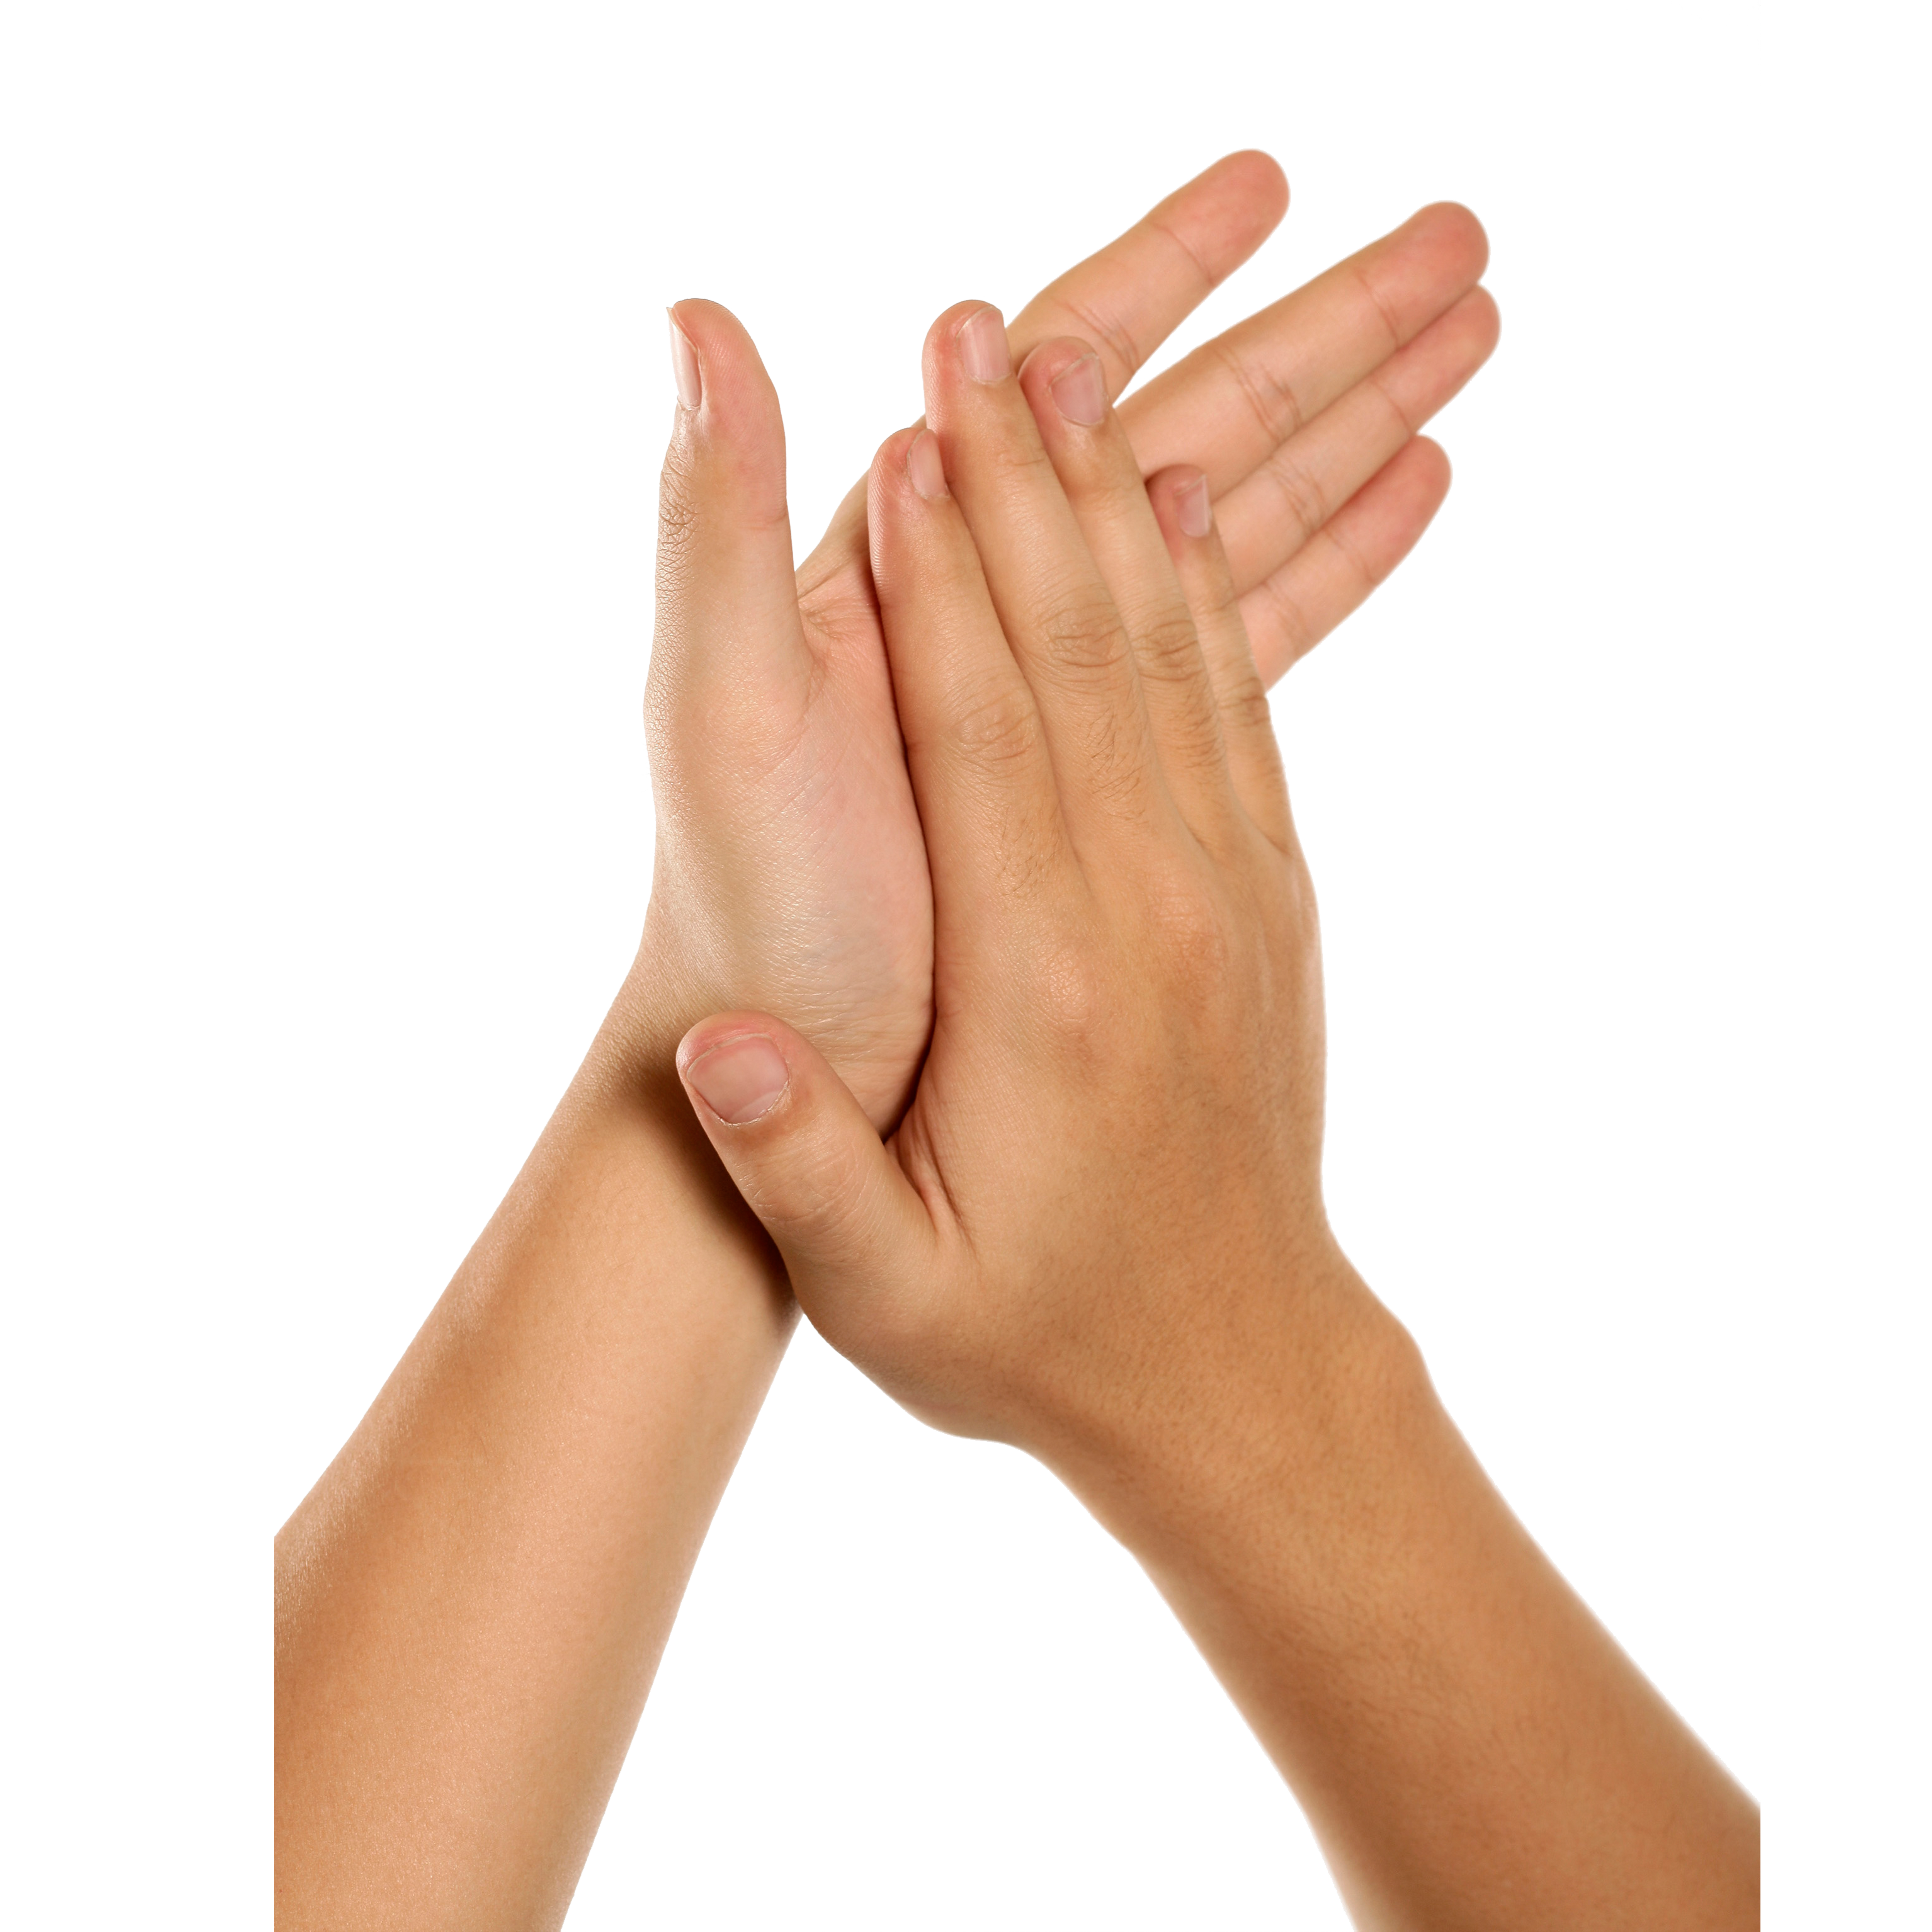 Clapping gesture applause clip. Nail clipart hand skin